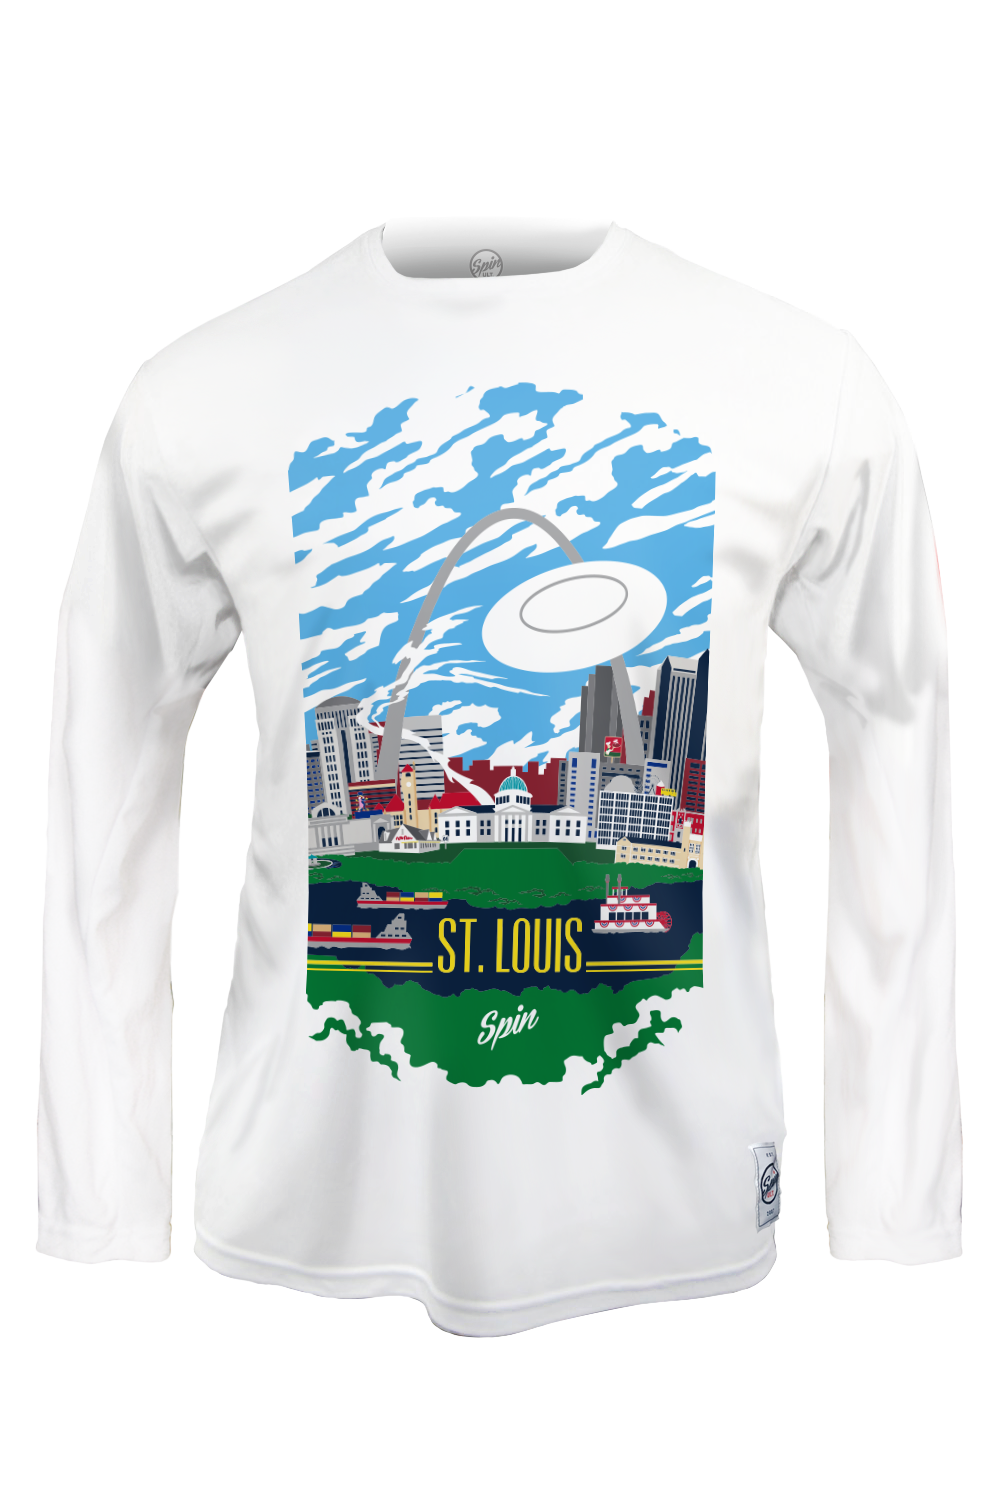 St. Louis Long Sleeve Jersey – Spin Ultimate